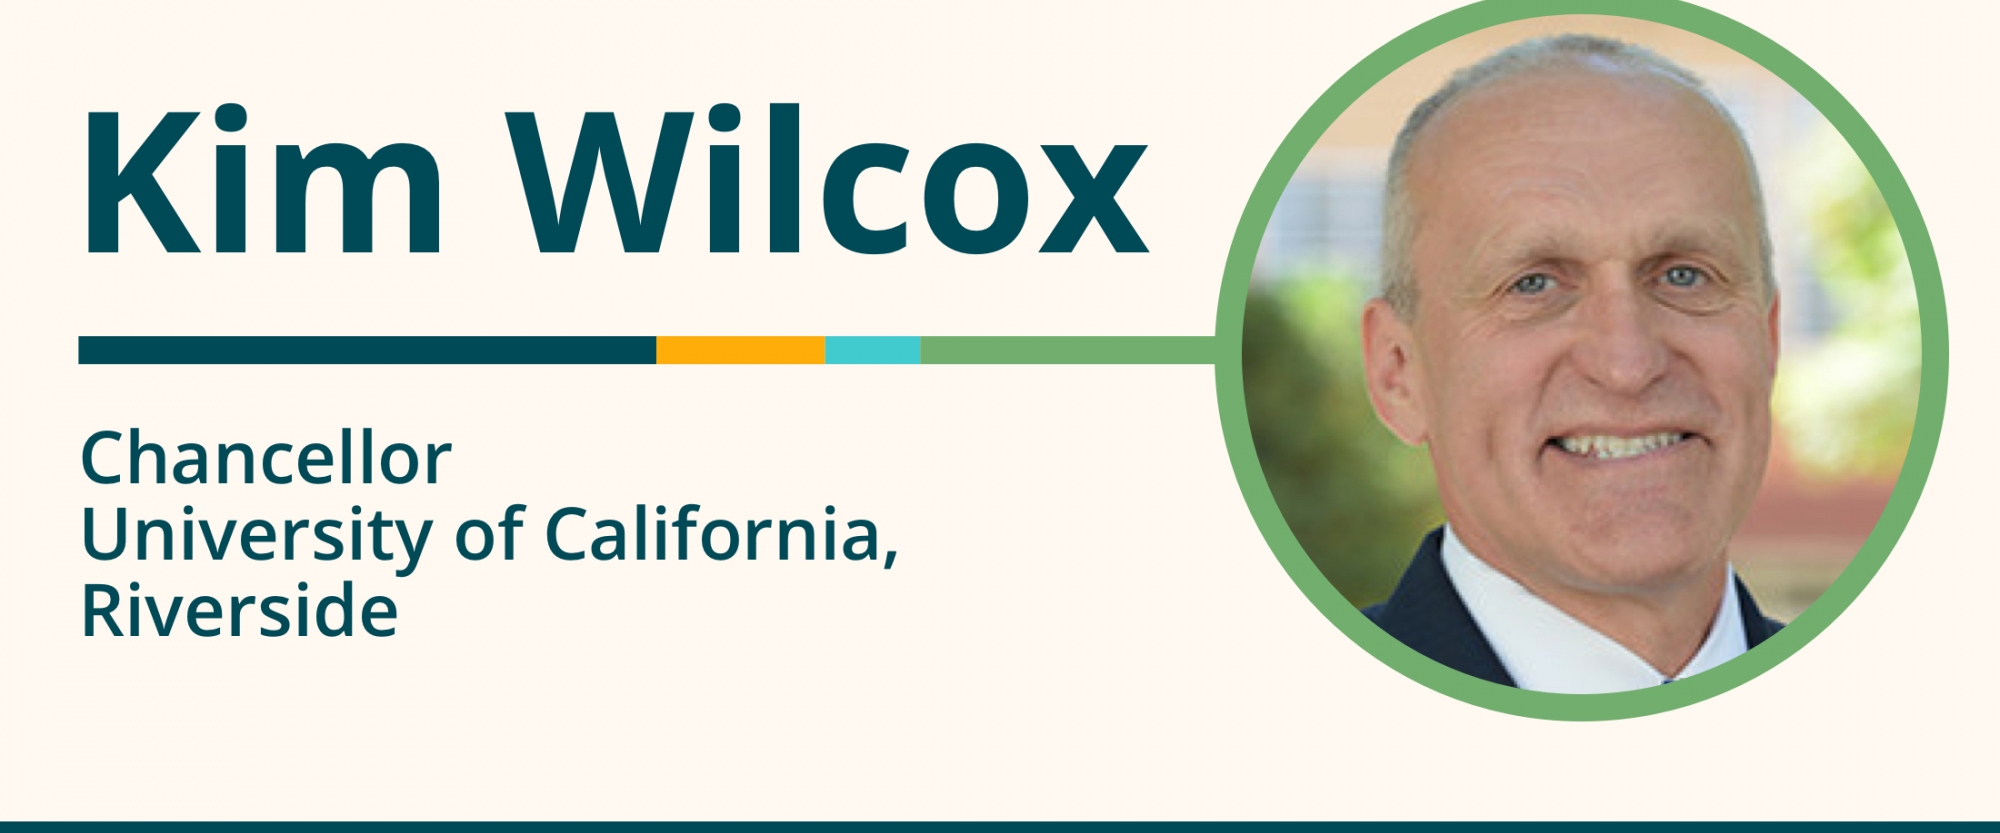 Weekly Wisdom 7/19/21: Transcript of Conversation With Kim Wilcox, Chancellor of the University of California, Riverside